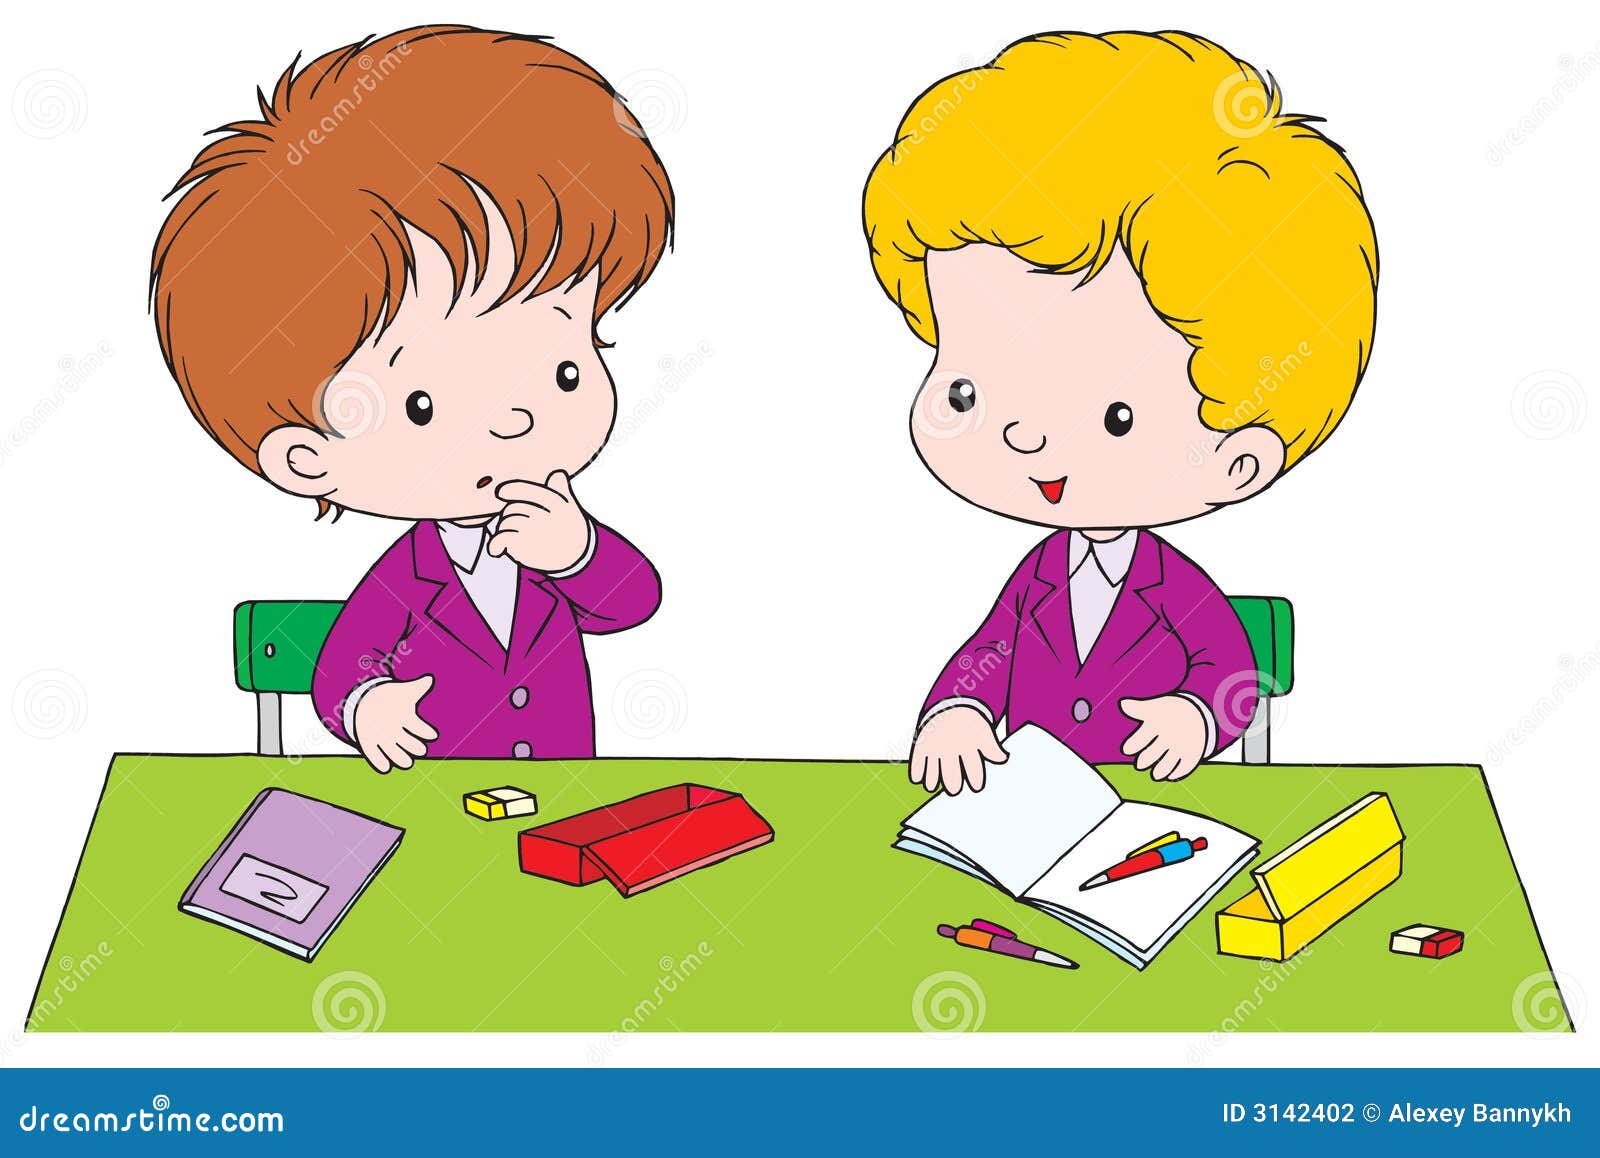 clipart pupils in class - photo #13